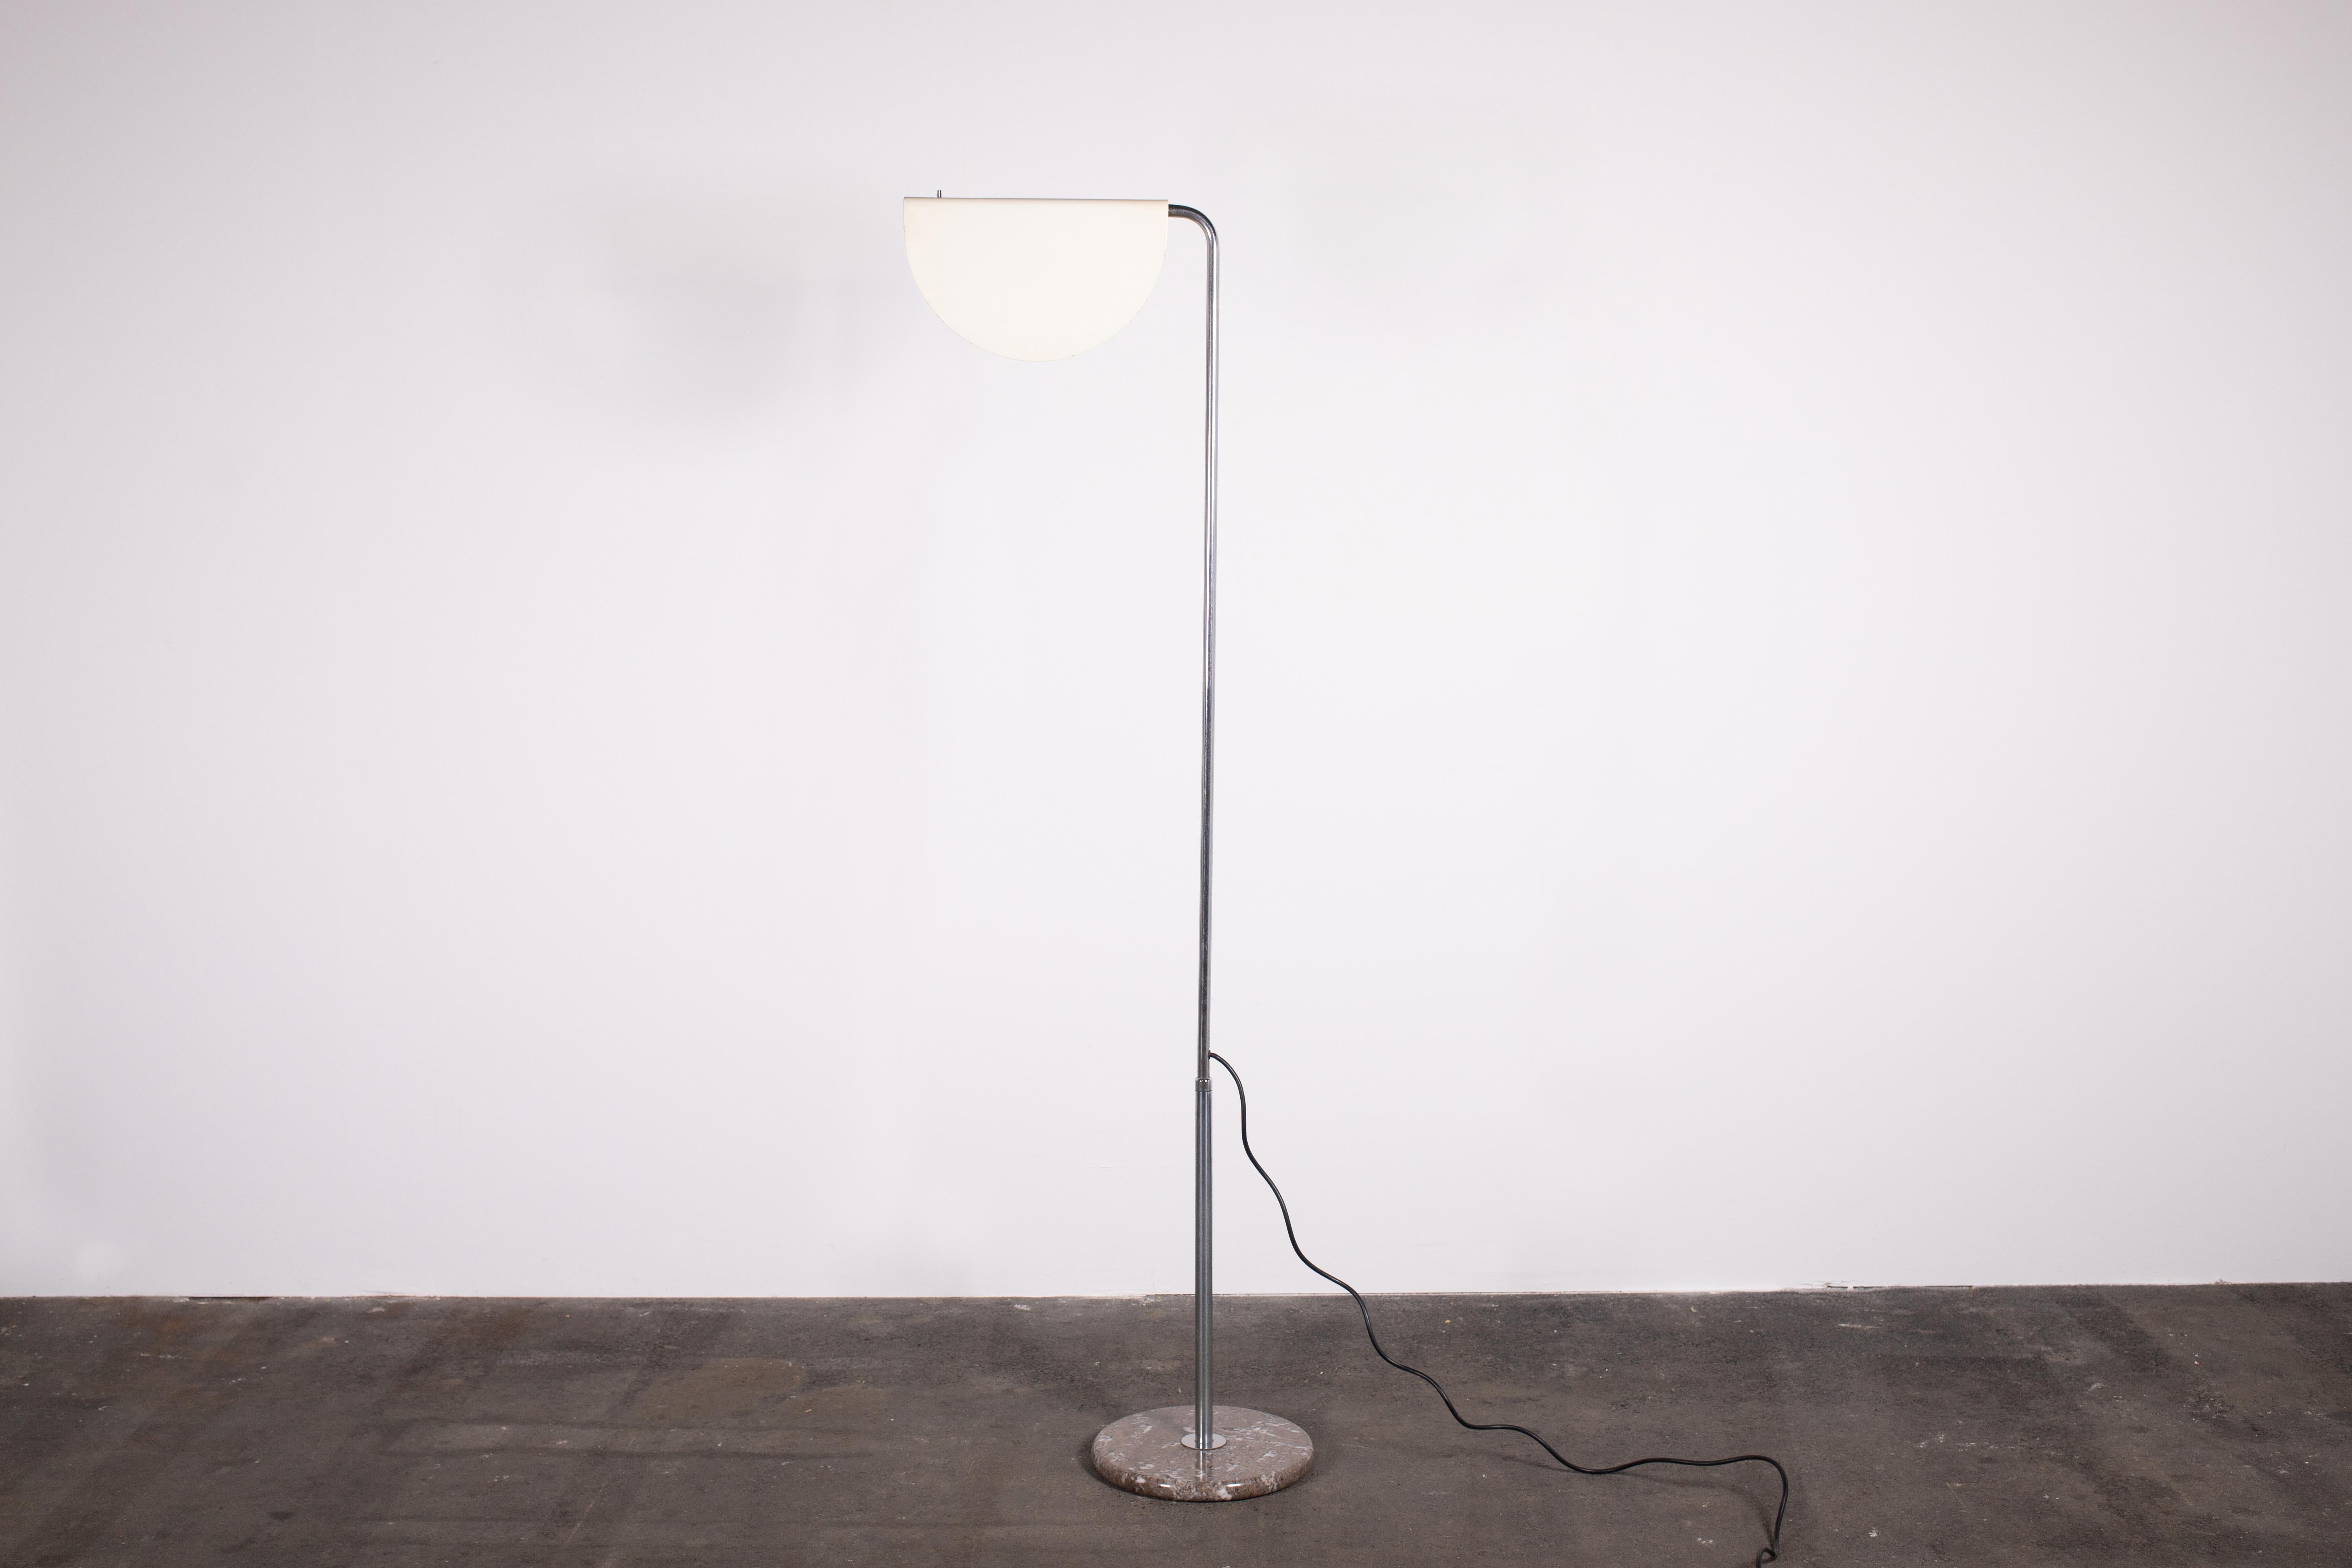 An iconic 1970s Mid-Century Modern Italian Mezzaluna (half-moon) extendable floor lamp by Bruno Gecchelin for Skipper, Italy. A minimalist masterpiece surprisingly packed with features and versatility.

This stunning example features off-white